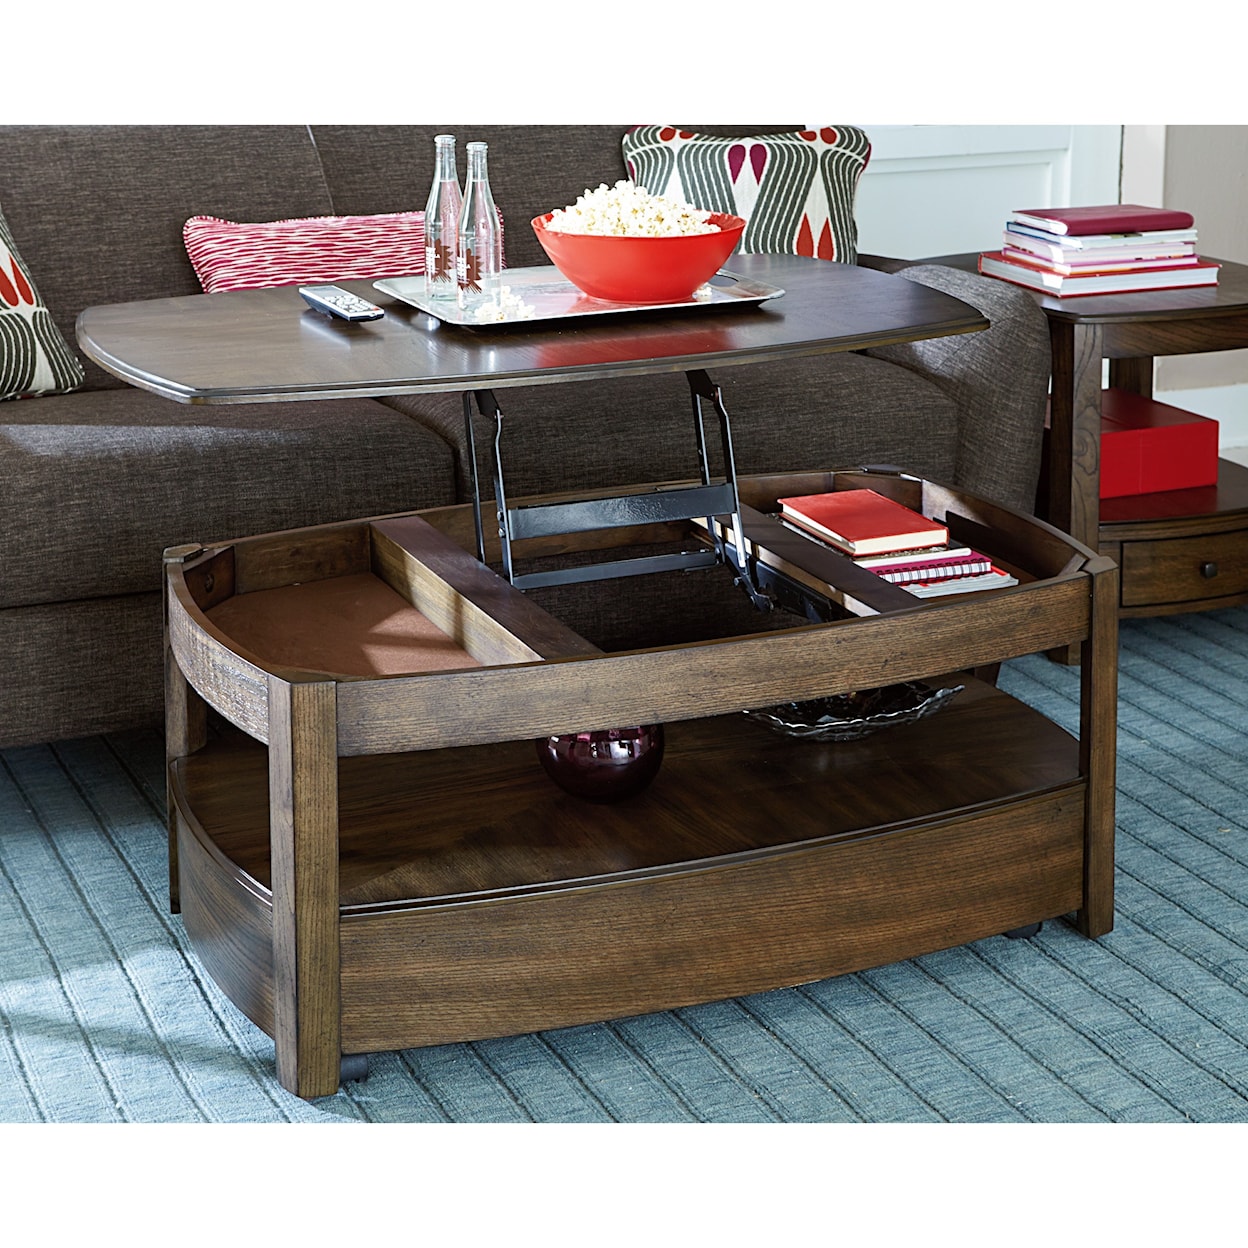 Hammary Primo Rectangular Lift-Top Cocktail Table